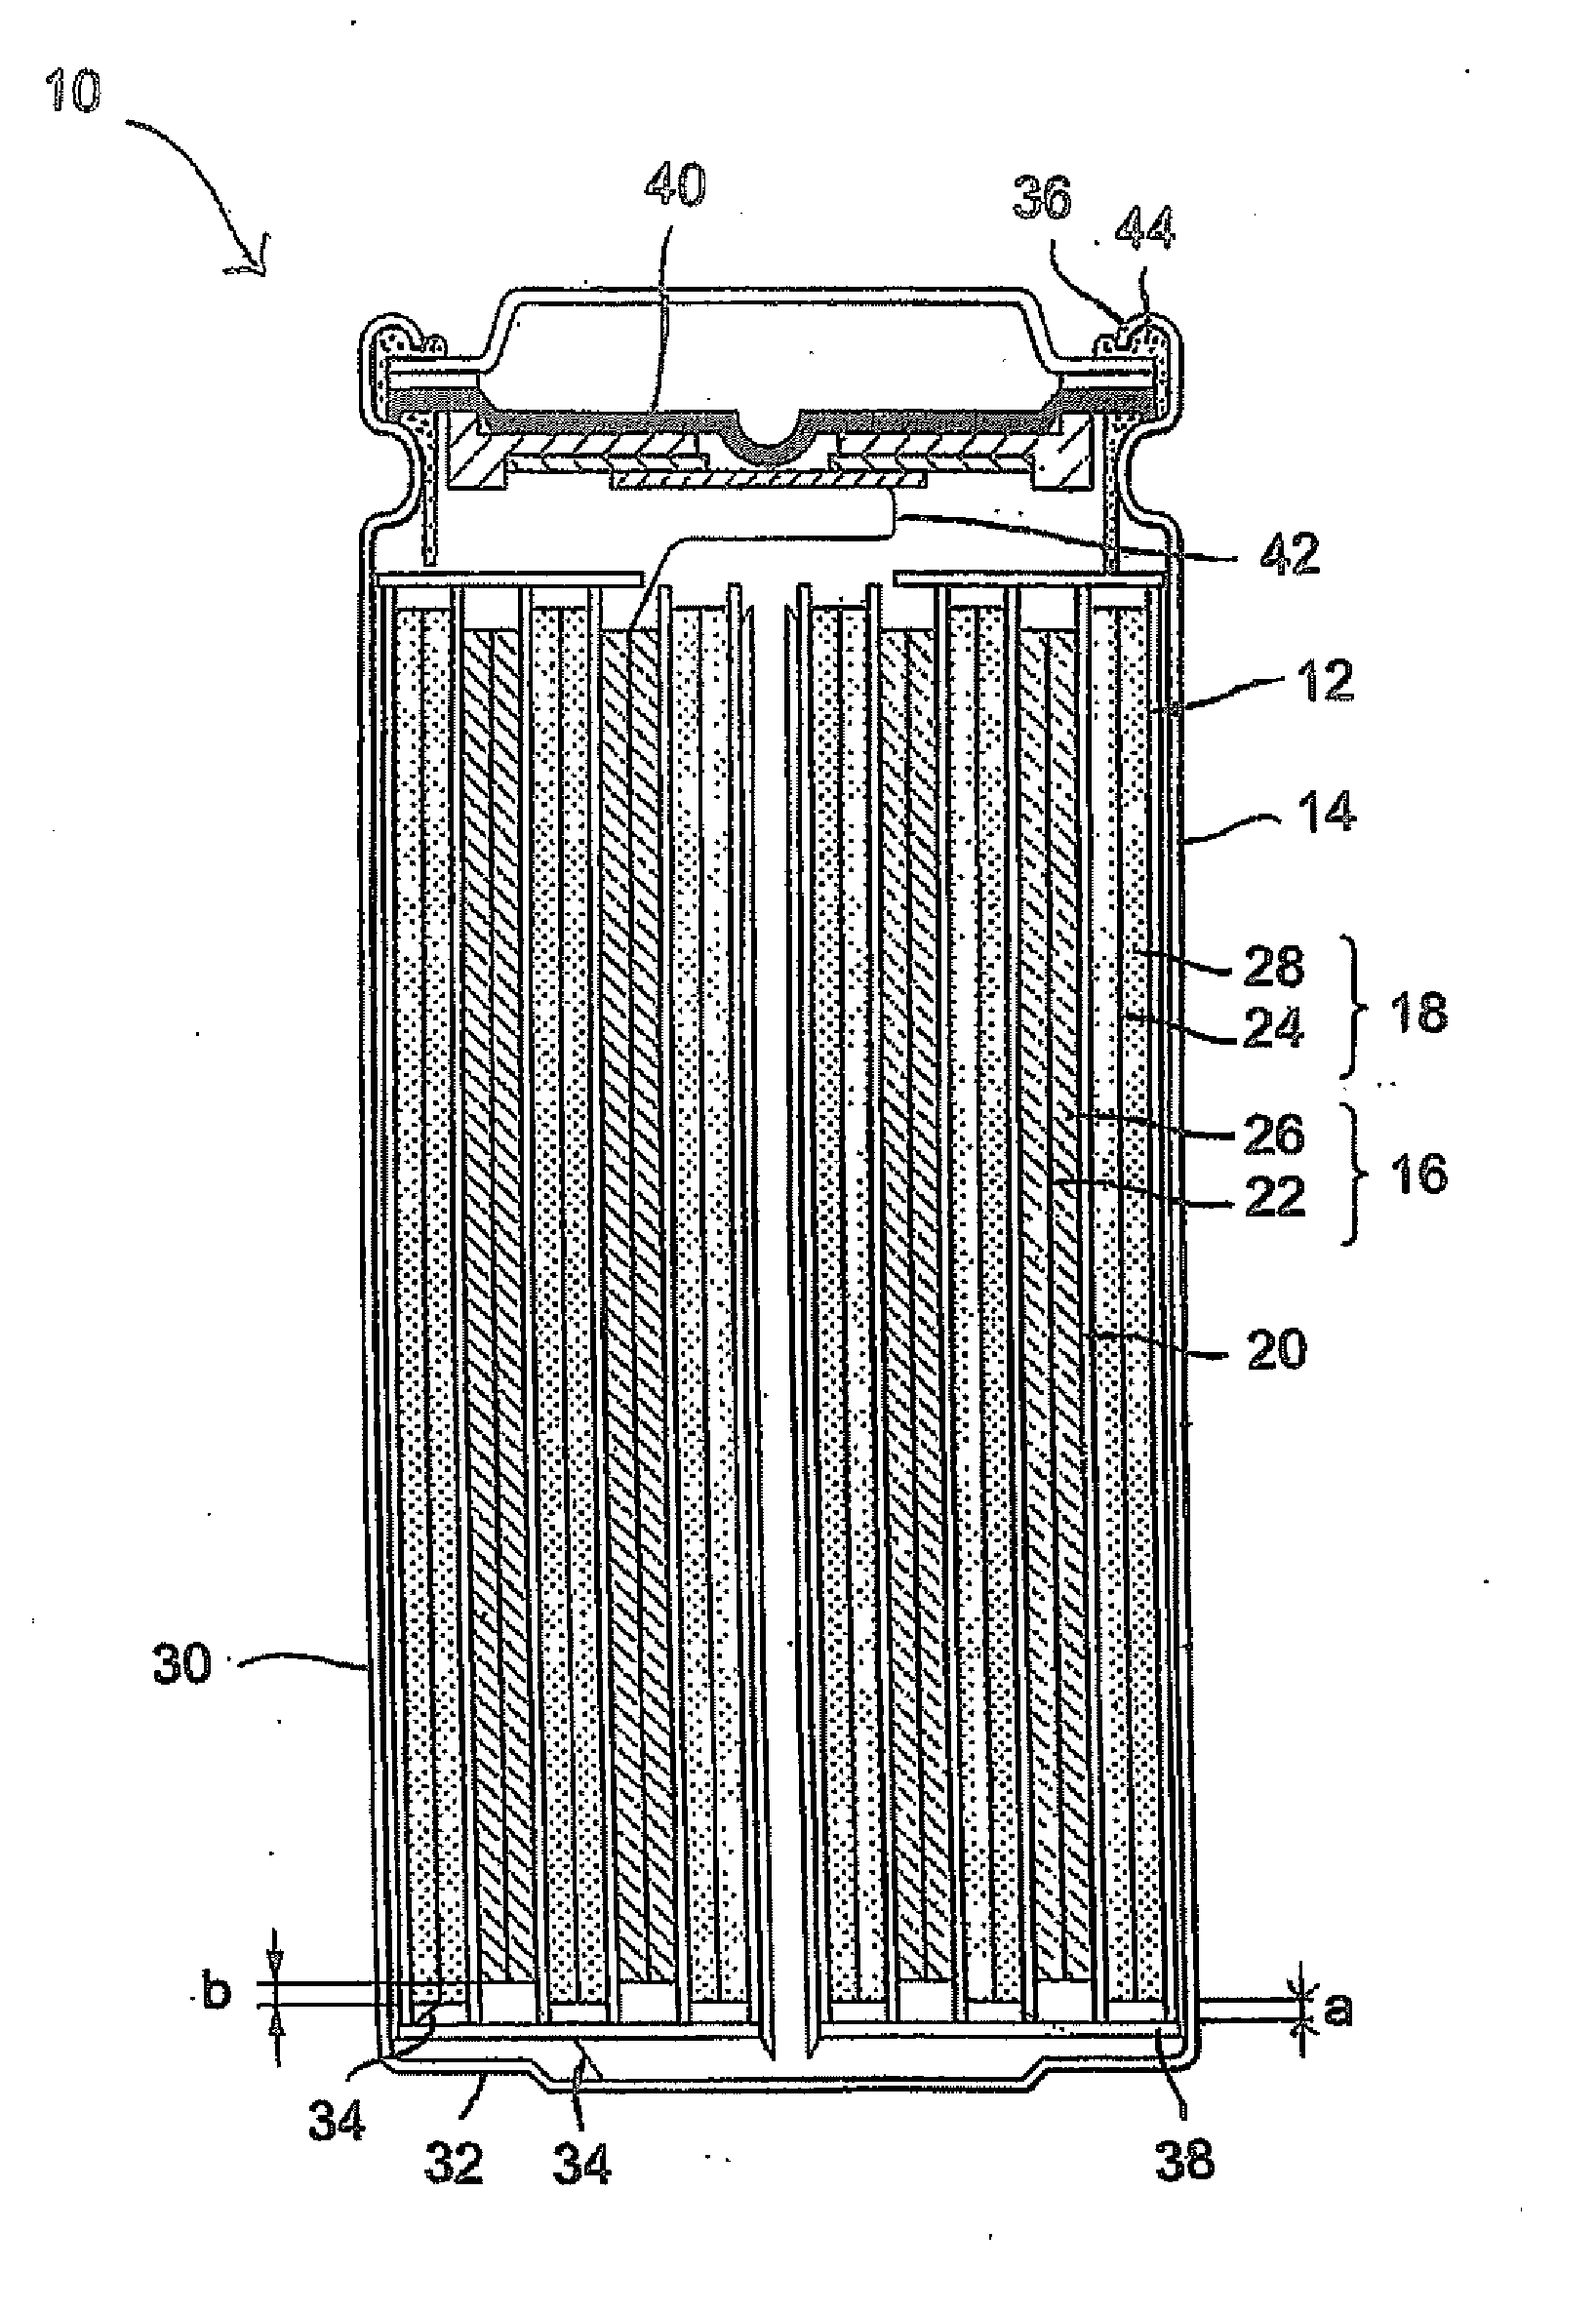 Method Of Making Active Materials For Use In Secondary Electrochemical Cells